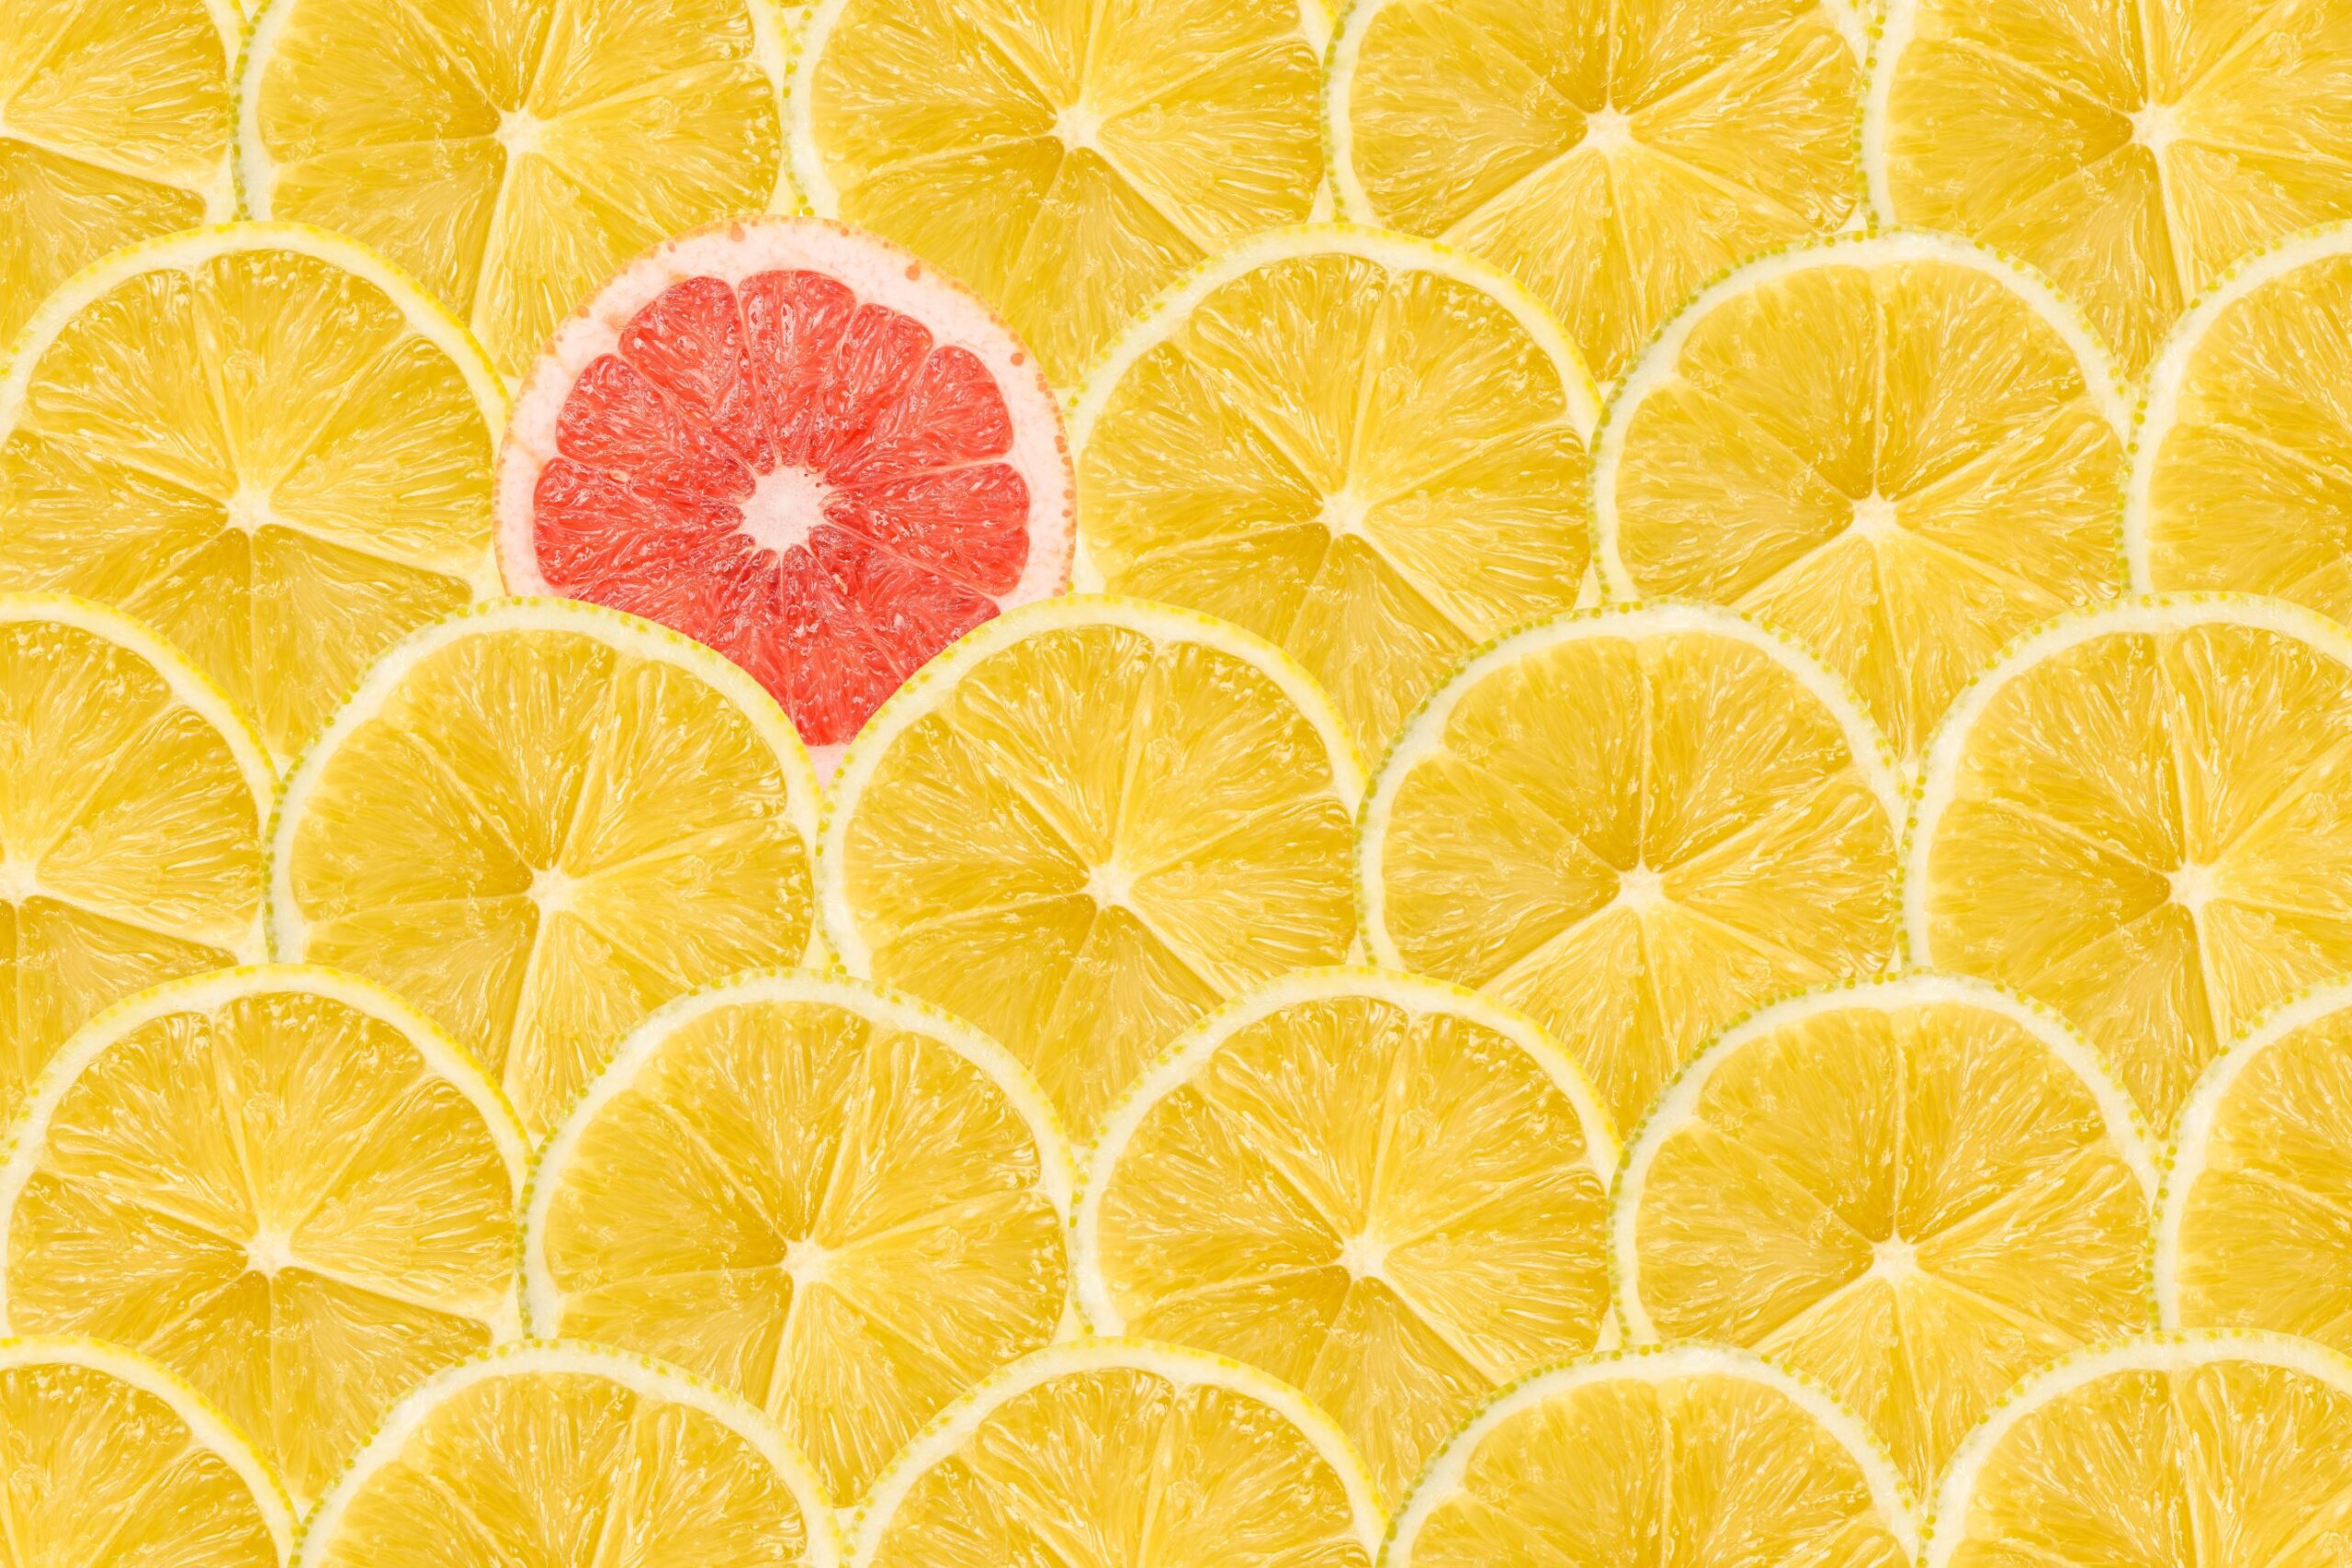 A recurring pattern of grapefruit slices with one standing out as pink. 